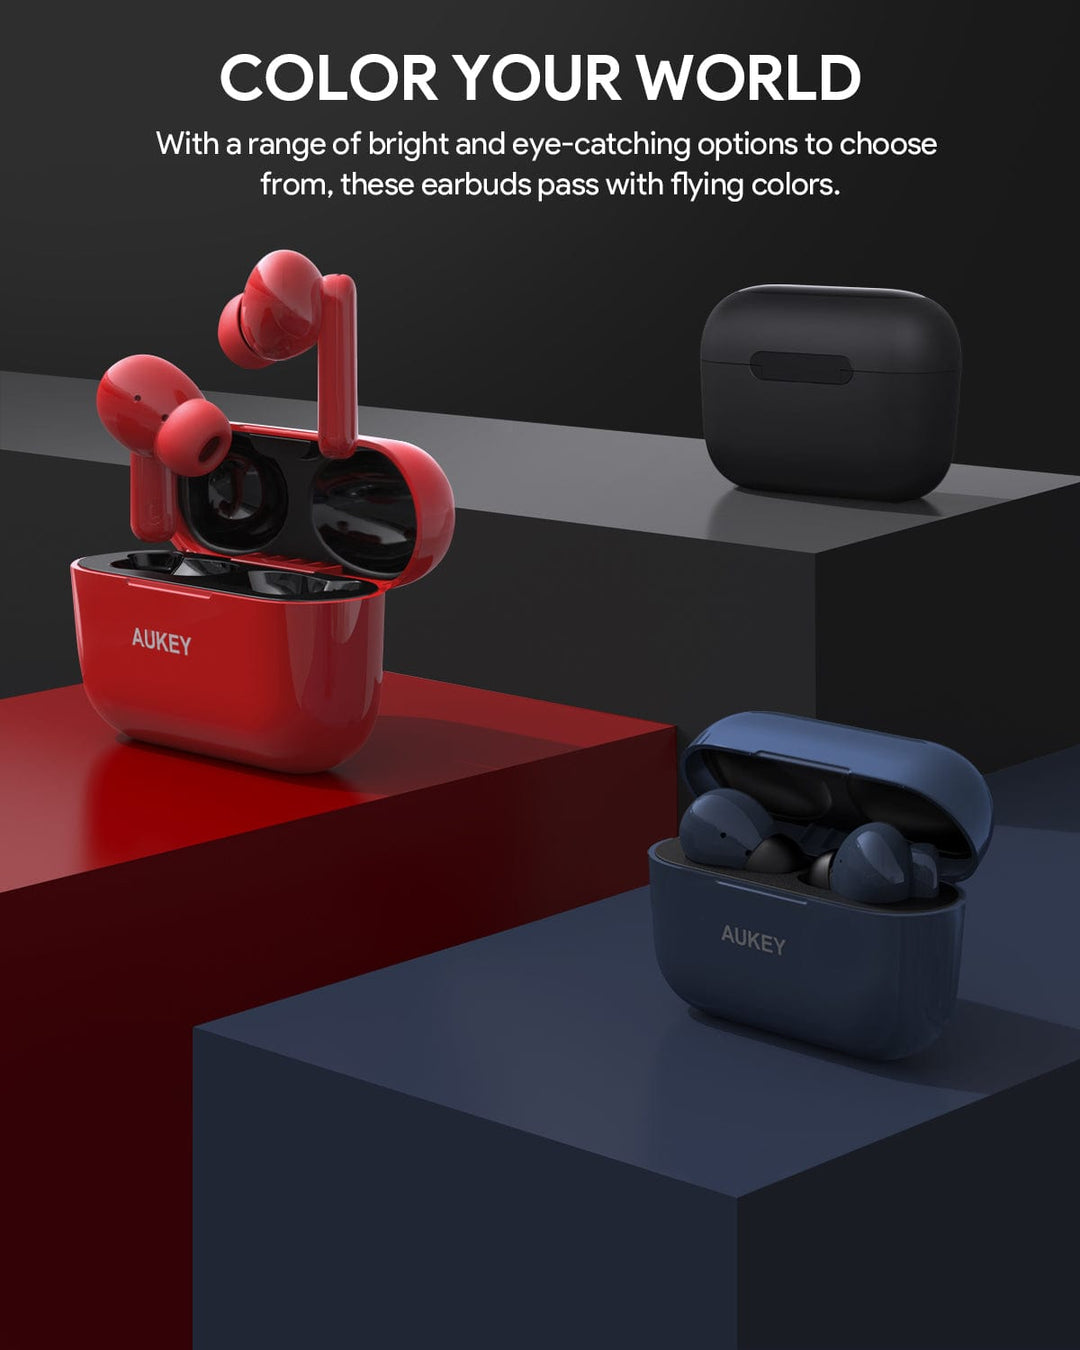 The Aukey MiniNC Active Noise Cancelling Earbuds are available in red, blue, and black.